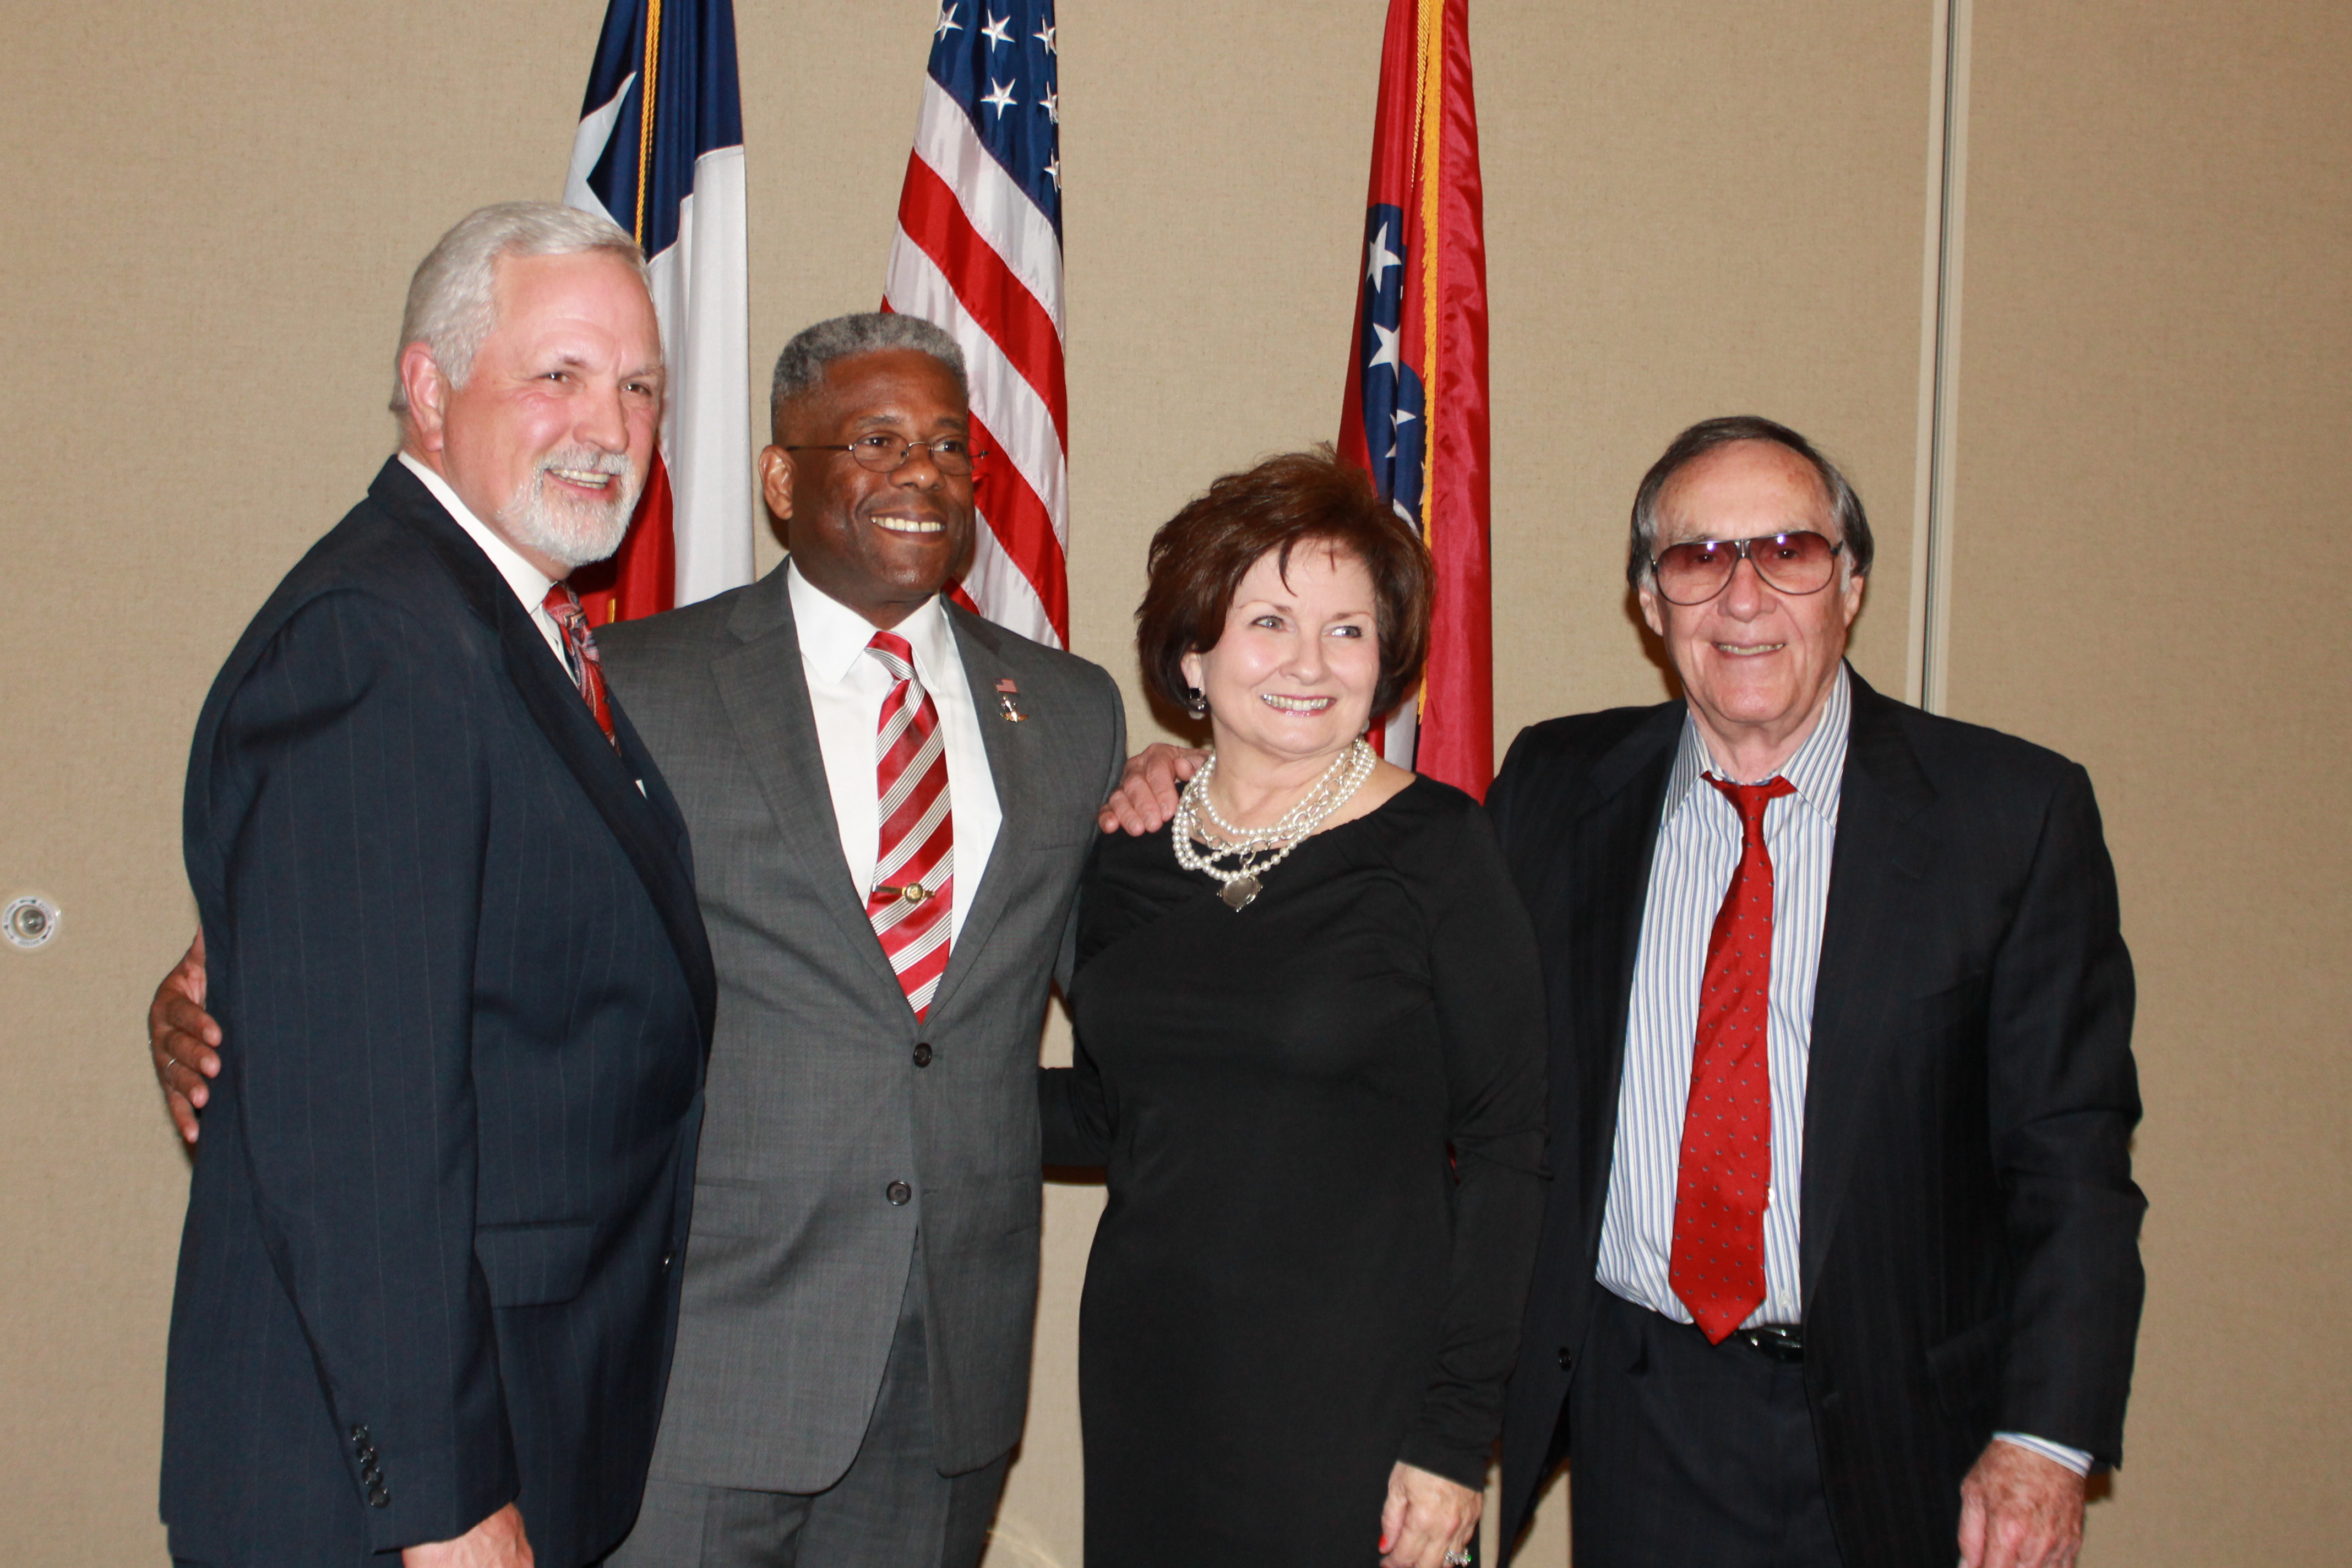 Event Hosts Bob White and Curt Green with Col. Allen West